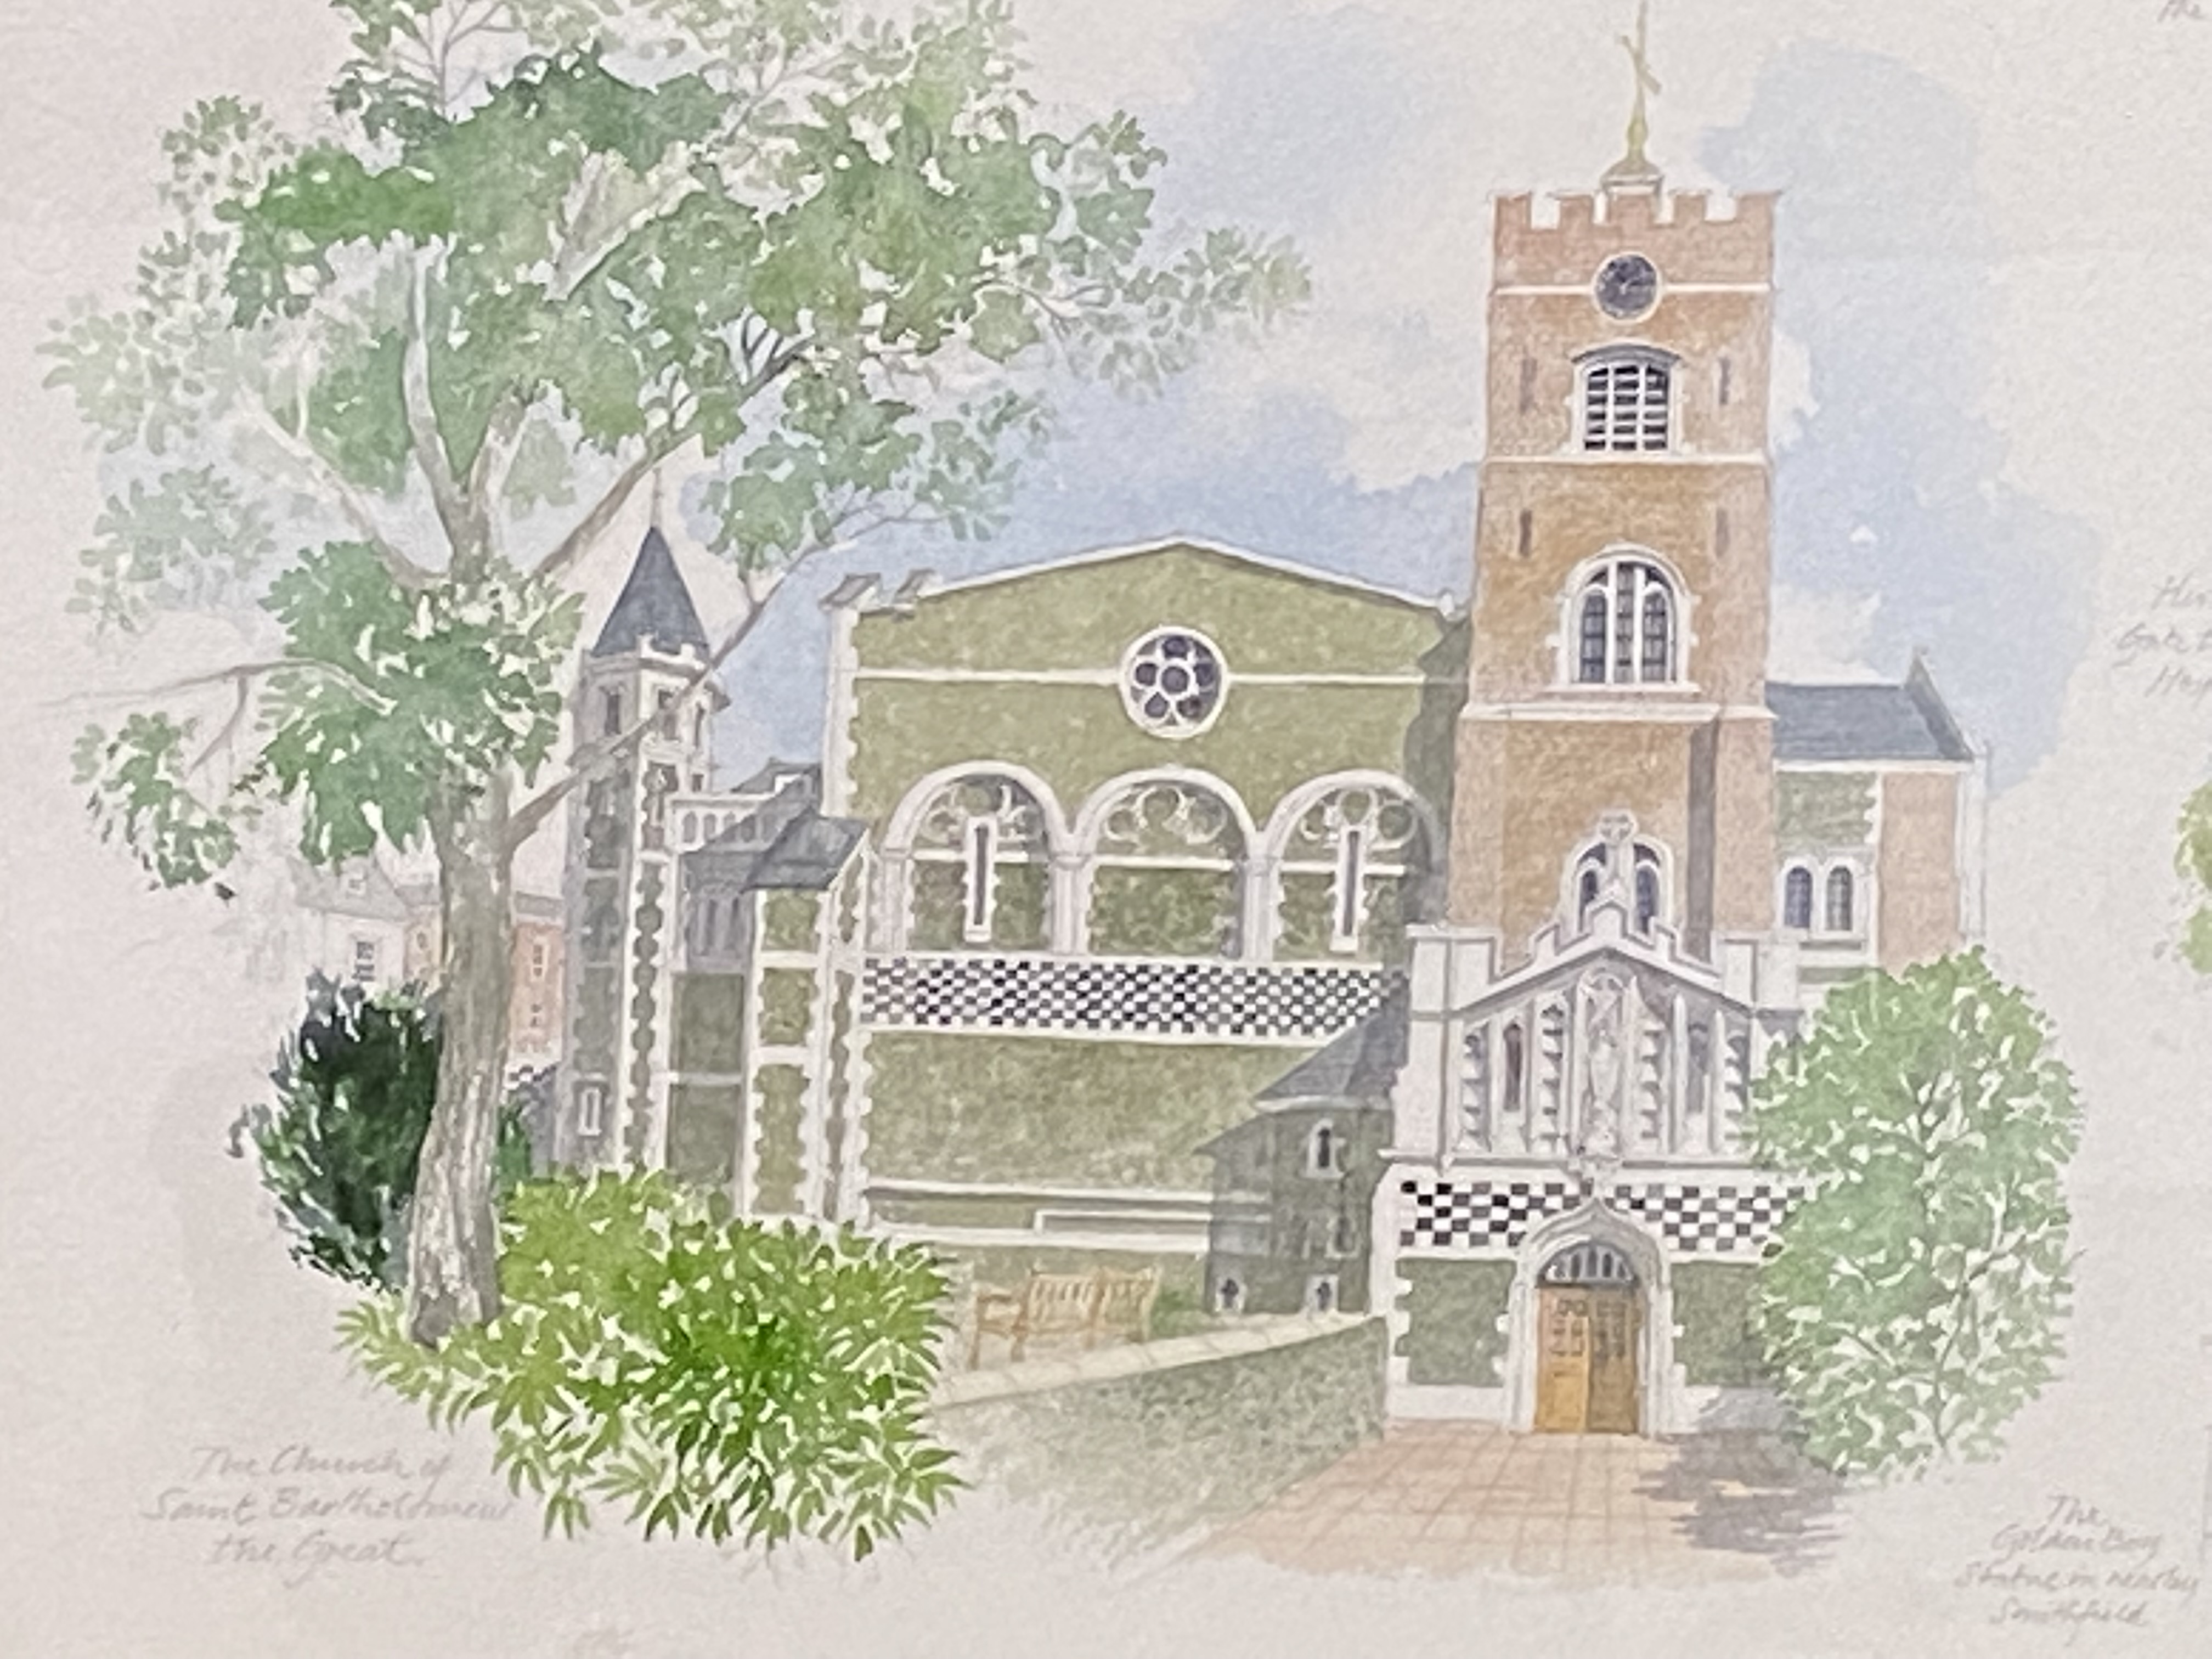 Watercolour of the Church of St. Bartholomew the Great - Image 3 of 5